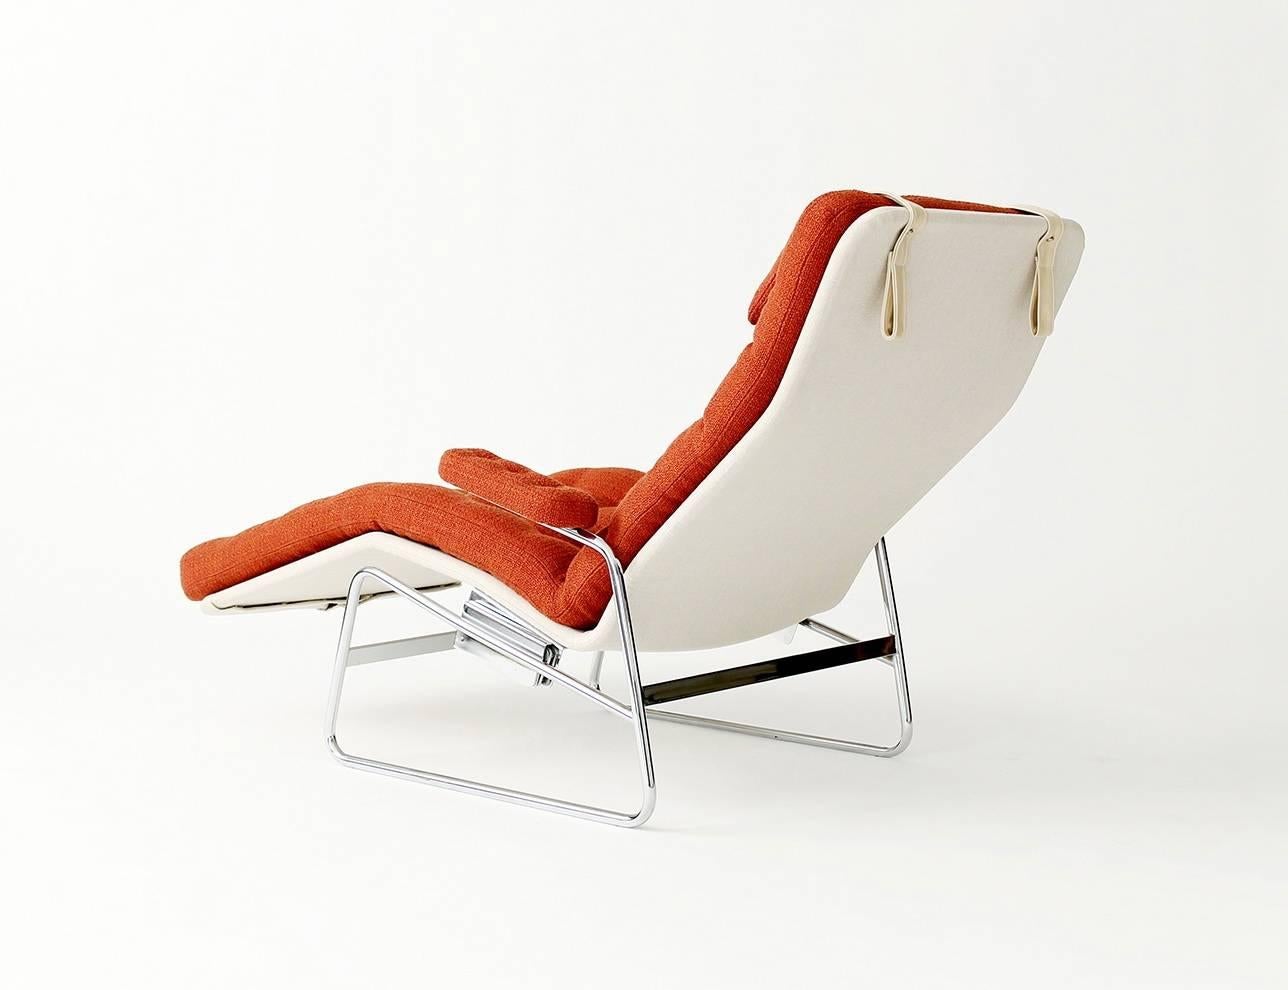 Fenix reclining lounge chair designed by Sam Larsson, produced by DUX of Sweden in the late 1970s. Newly upholstered, with removable headrest.